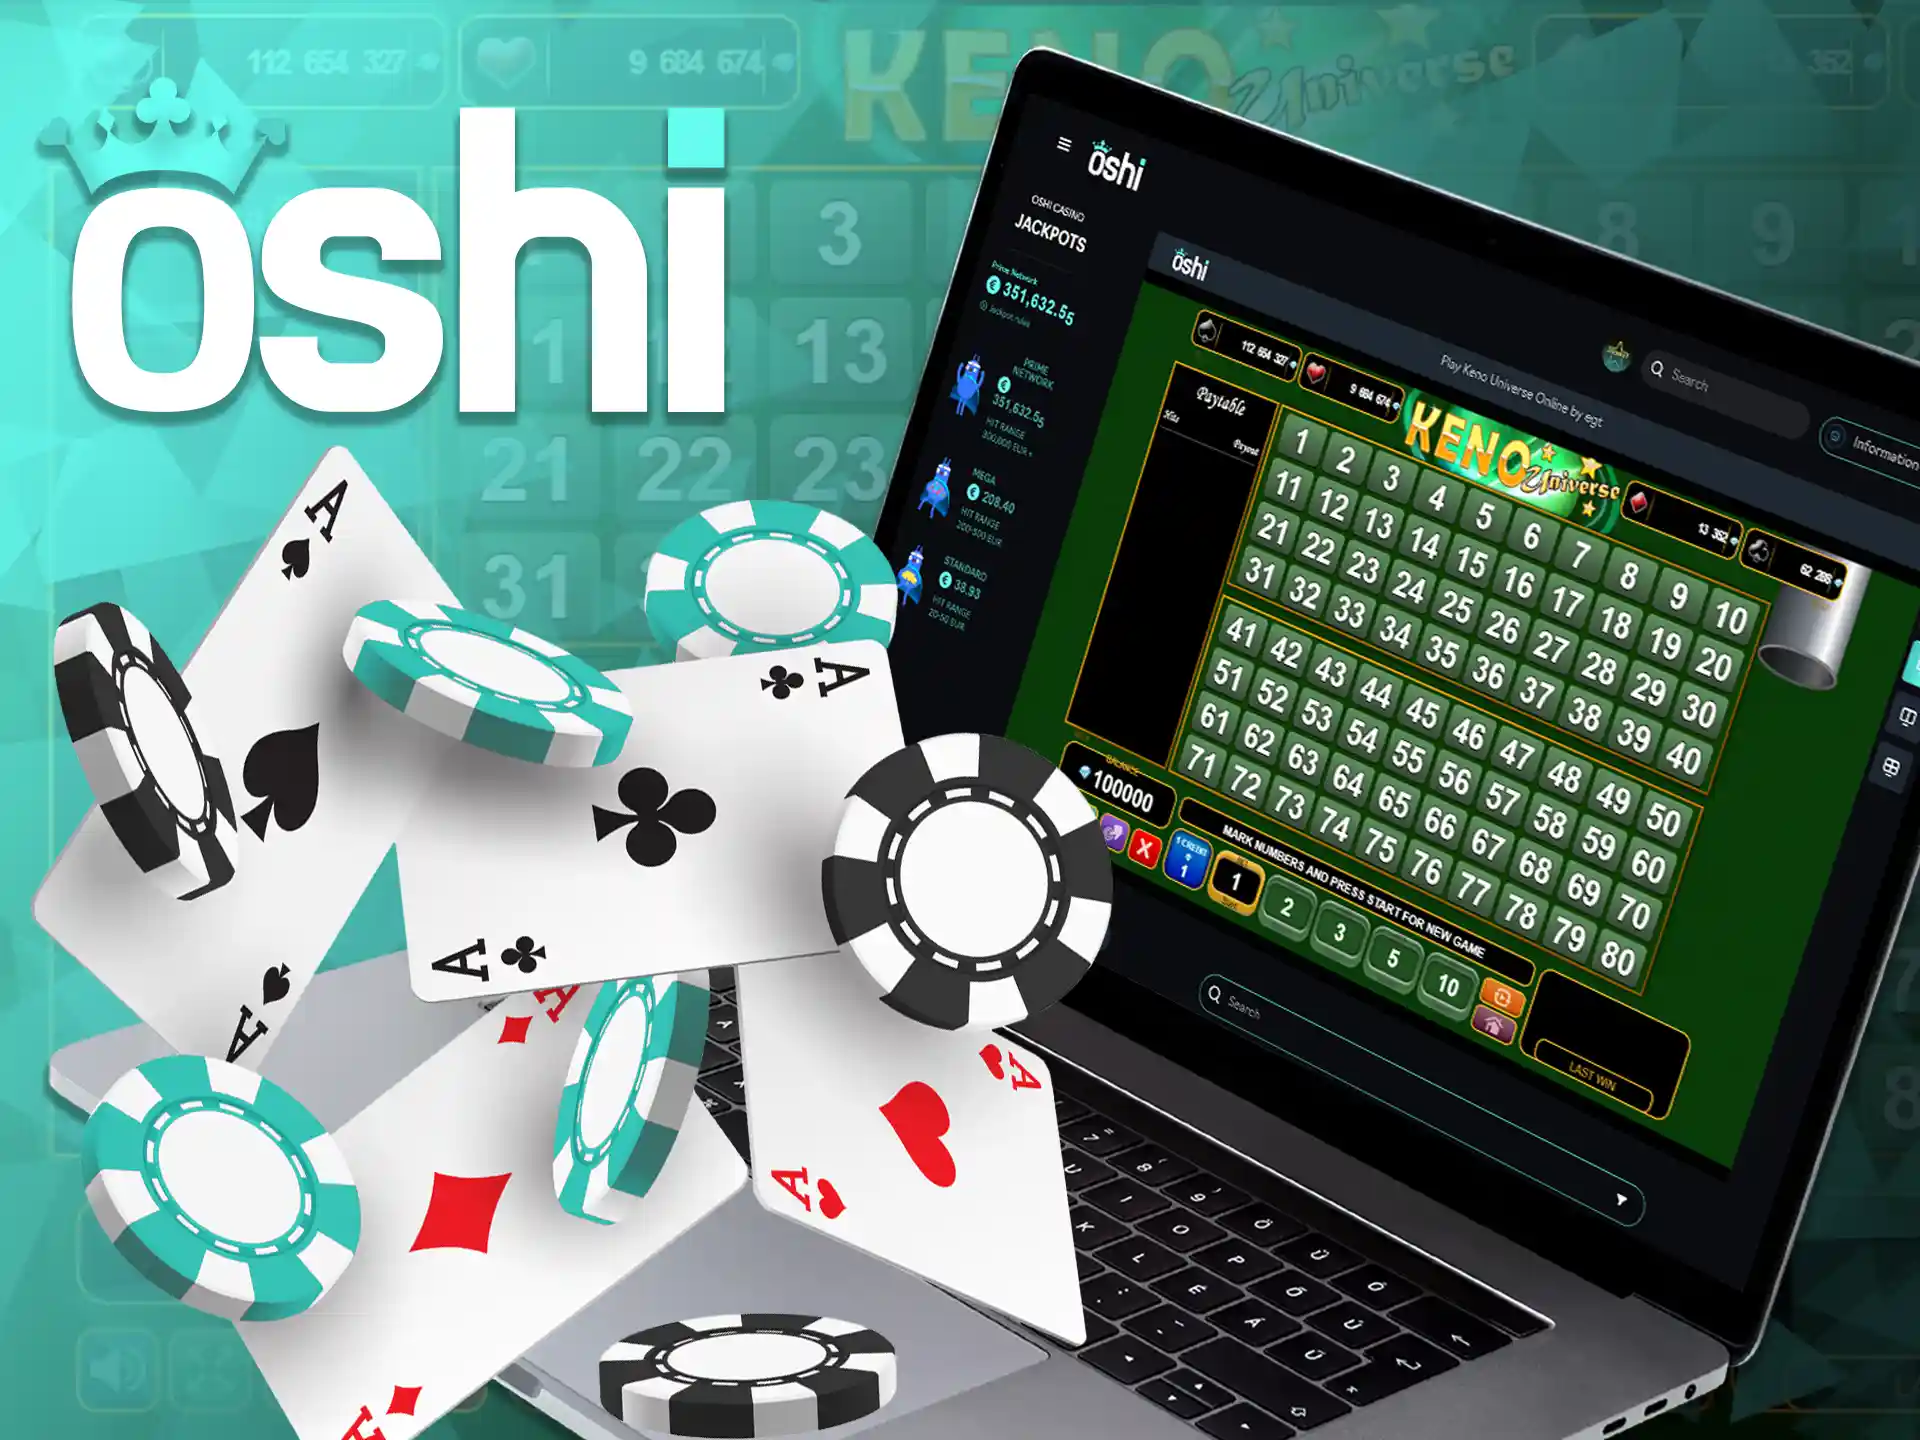 Oshi Online Casino offers exciting bonuses and promotions for TV games category.